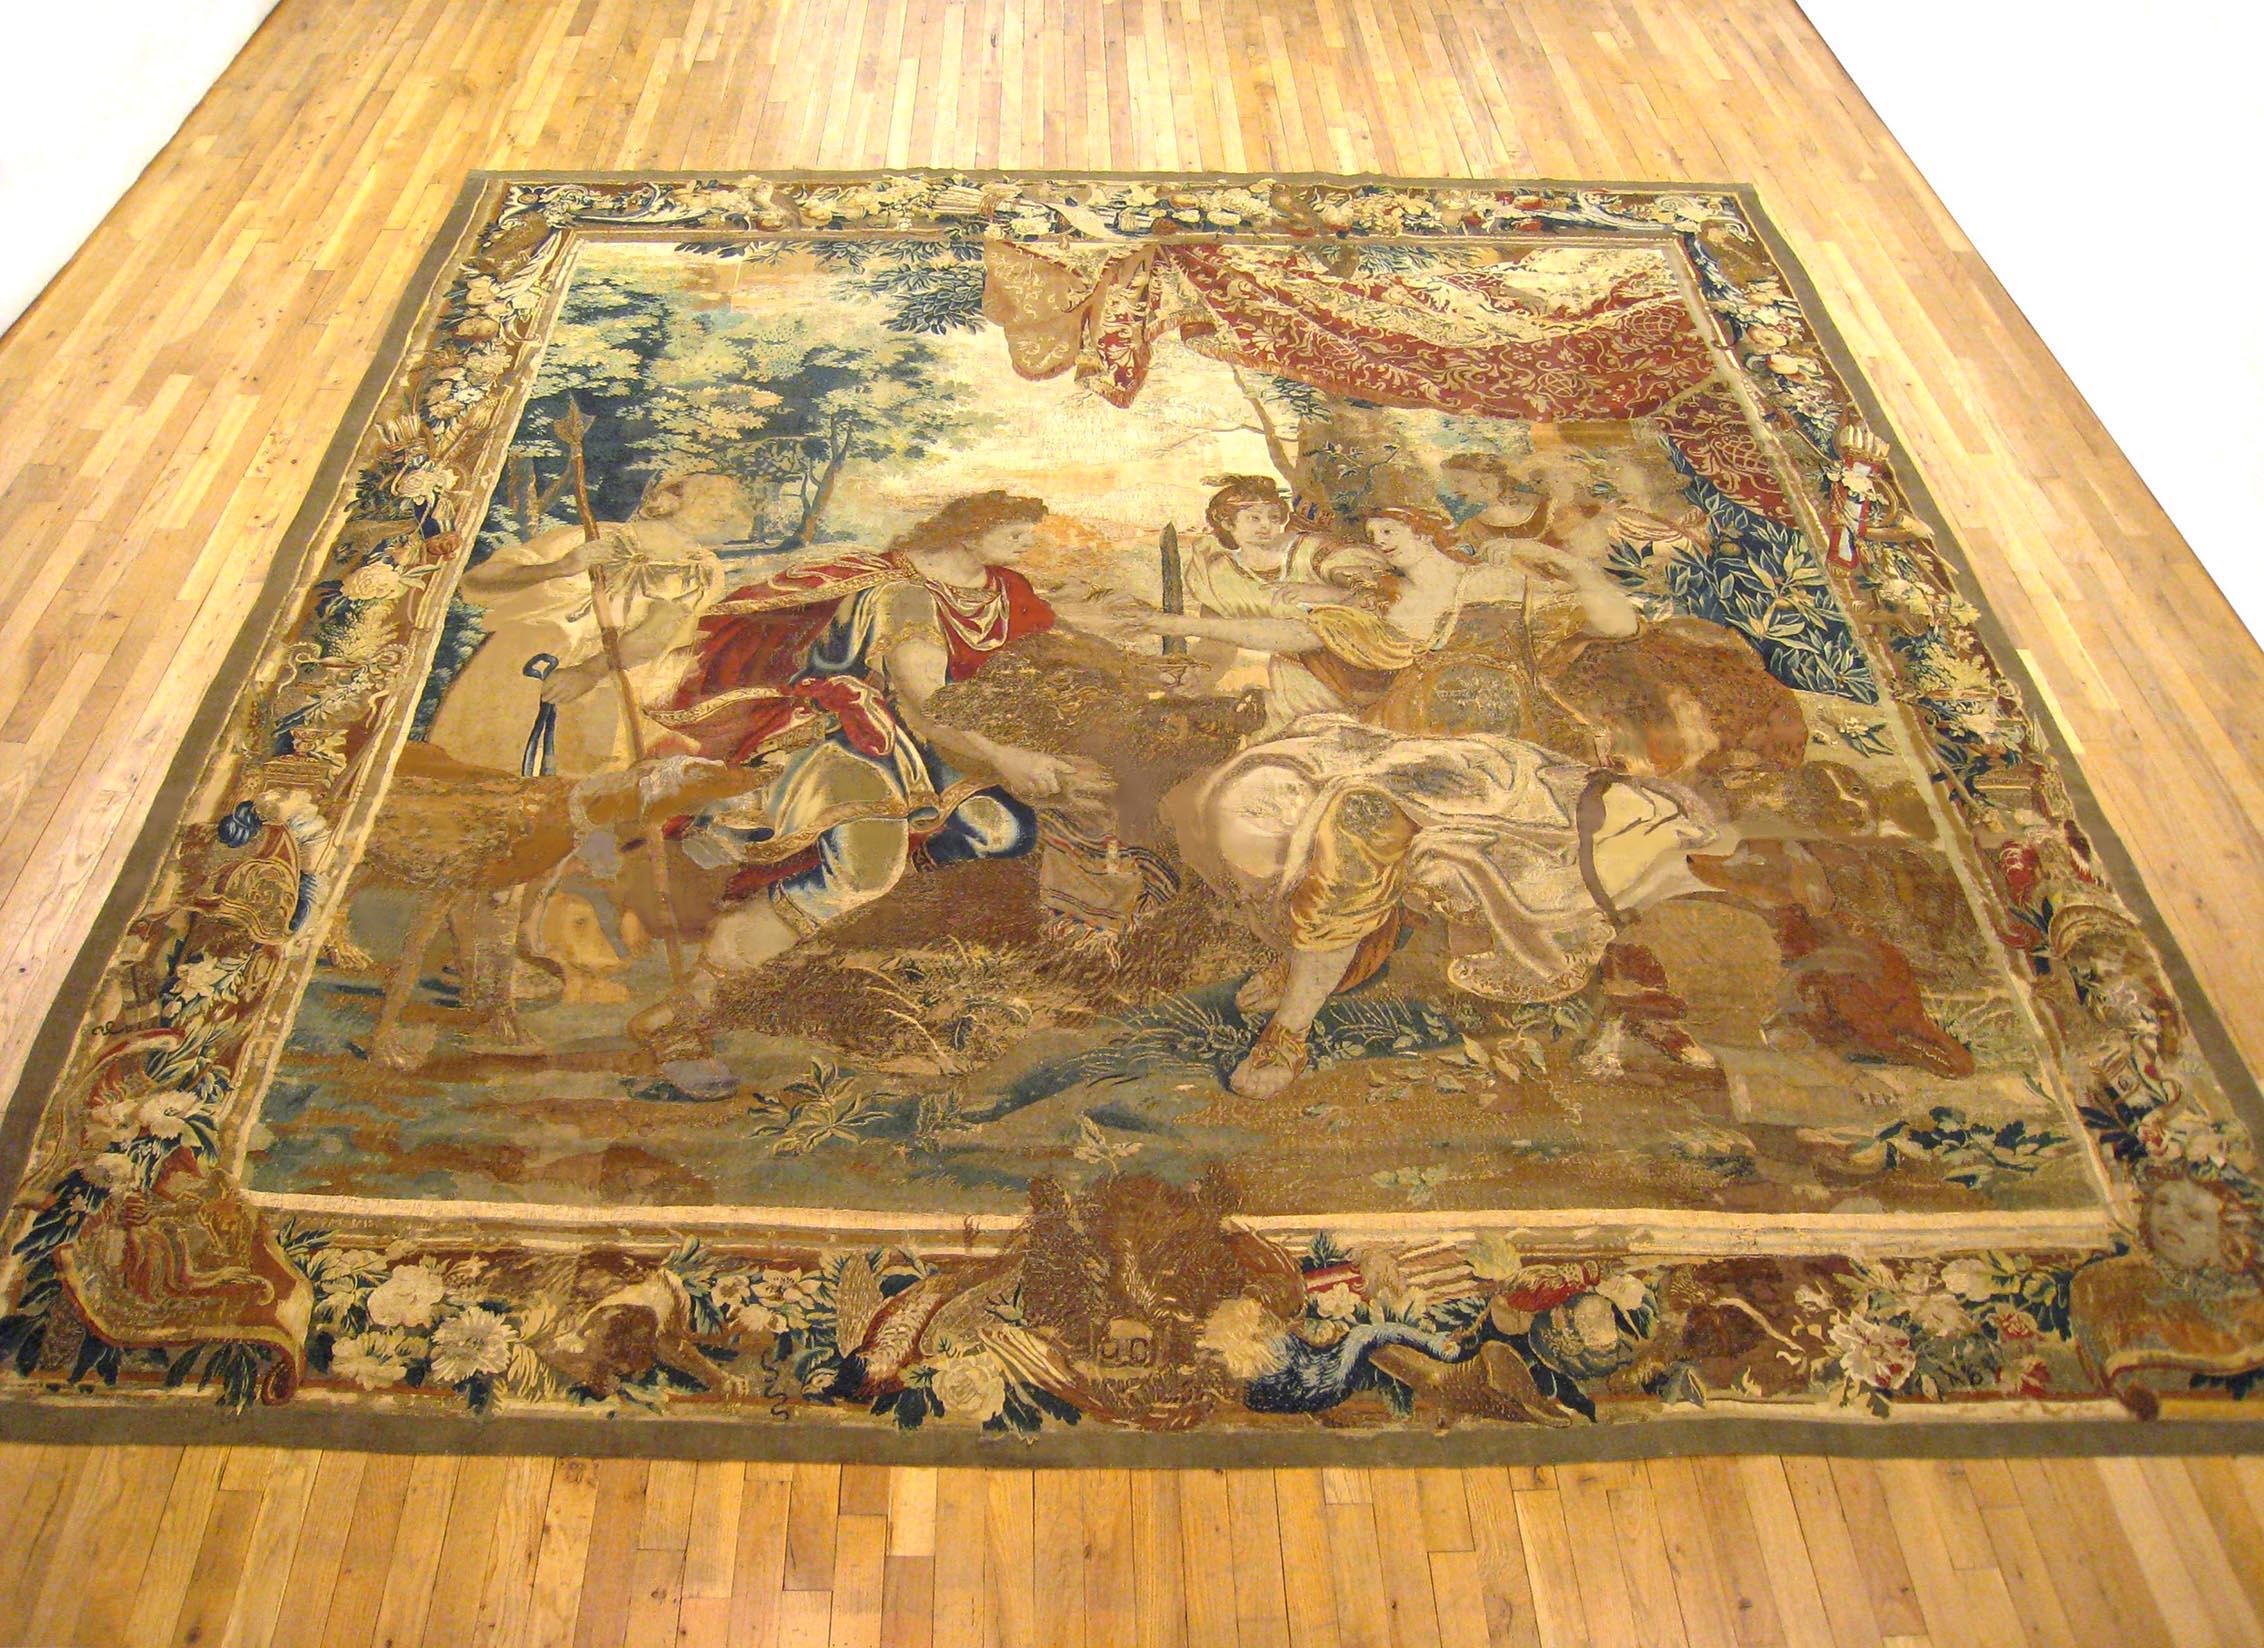 An antique 17th century Brussels mythological tapestry, size 11'6 H x 10'8 W, from the workshop of the renowned weaver, Jan Leyniers, after cartoons by Charles Le Brun and François Bellin for the landscapes. The set was rewoven many times with some